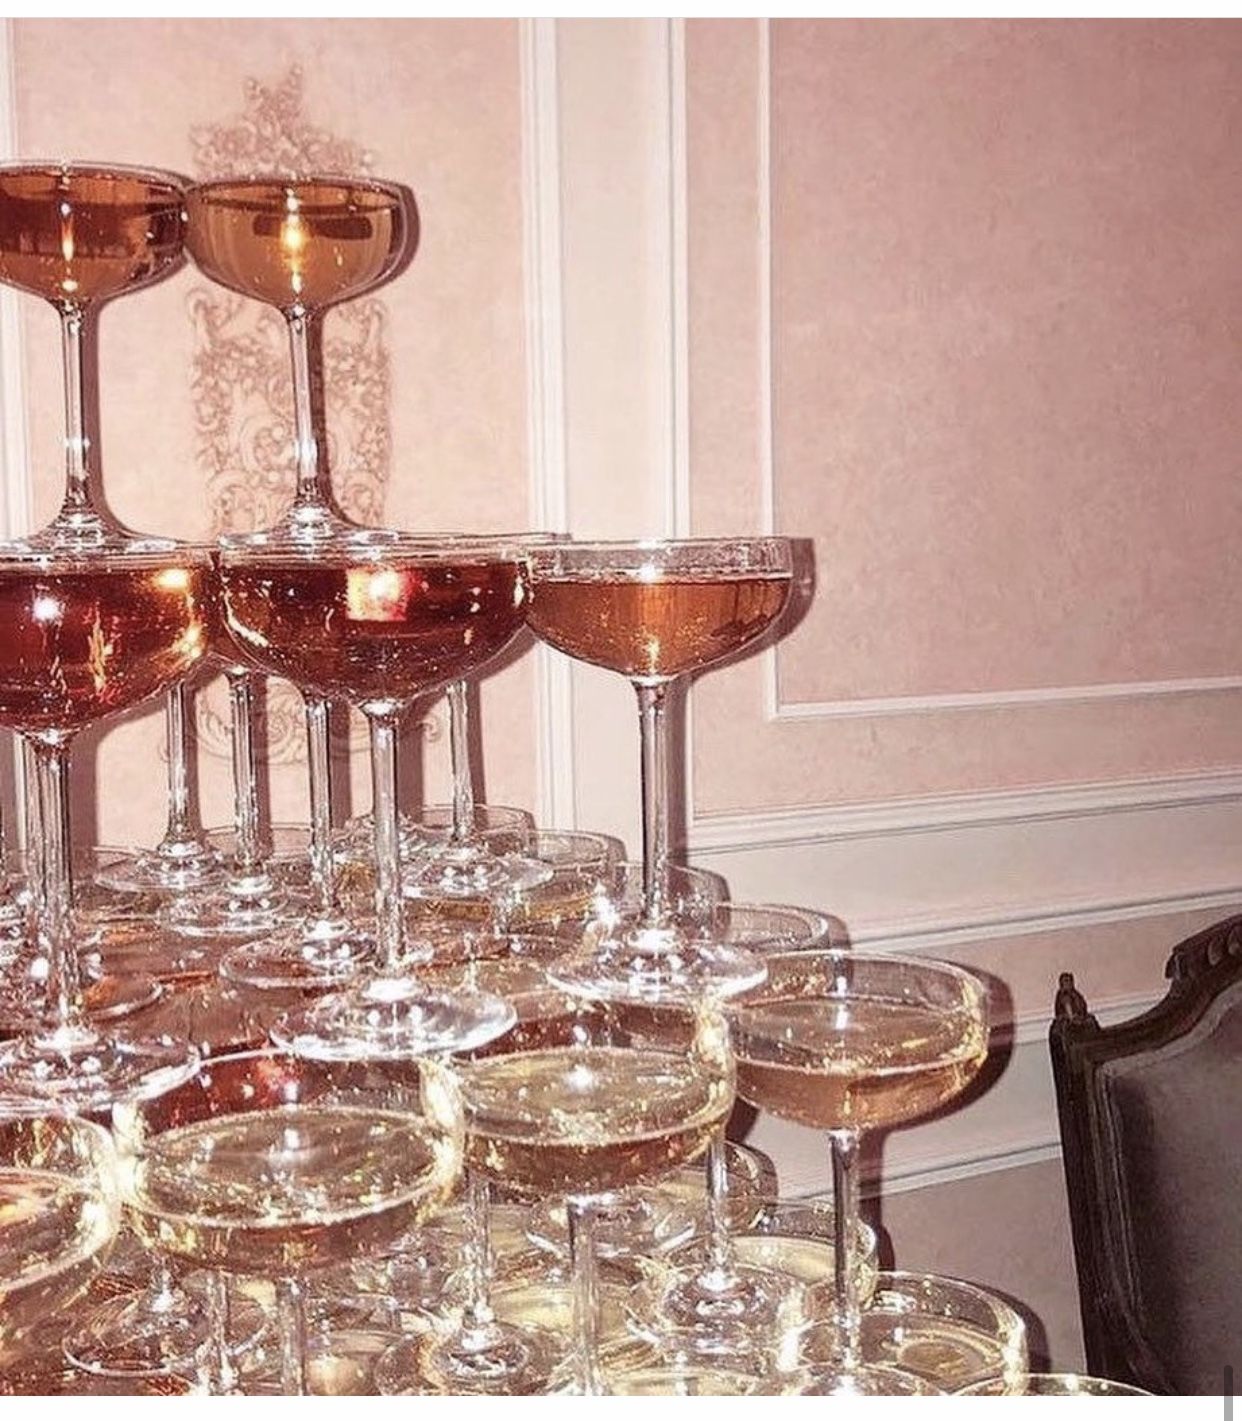 A tower of glasses with wine in them. - Champagne